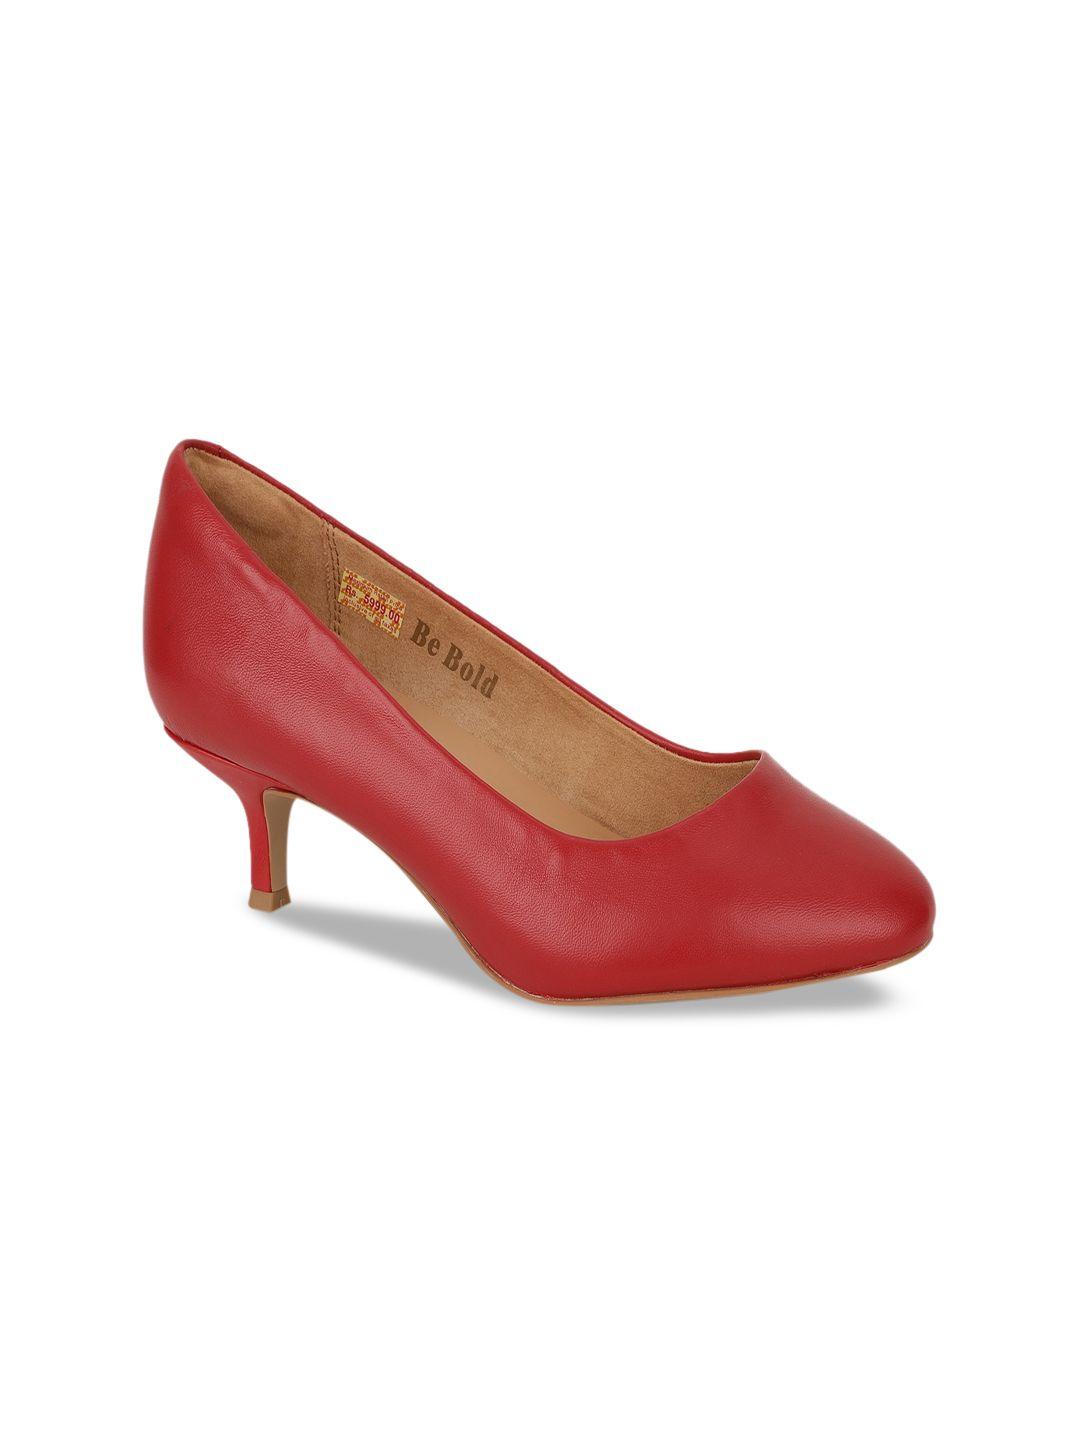 hush-puppies-women-red-leather-party-kitten-pumps